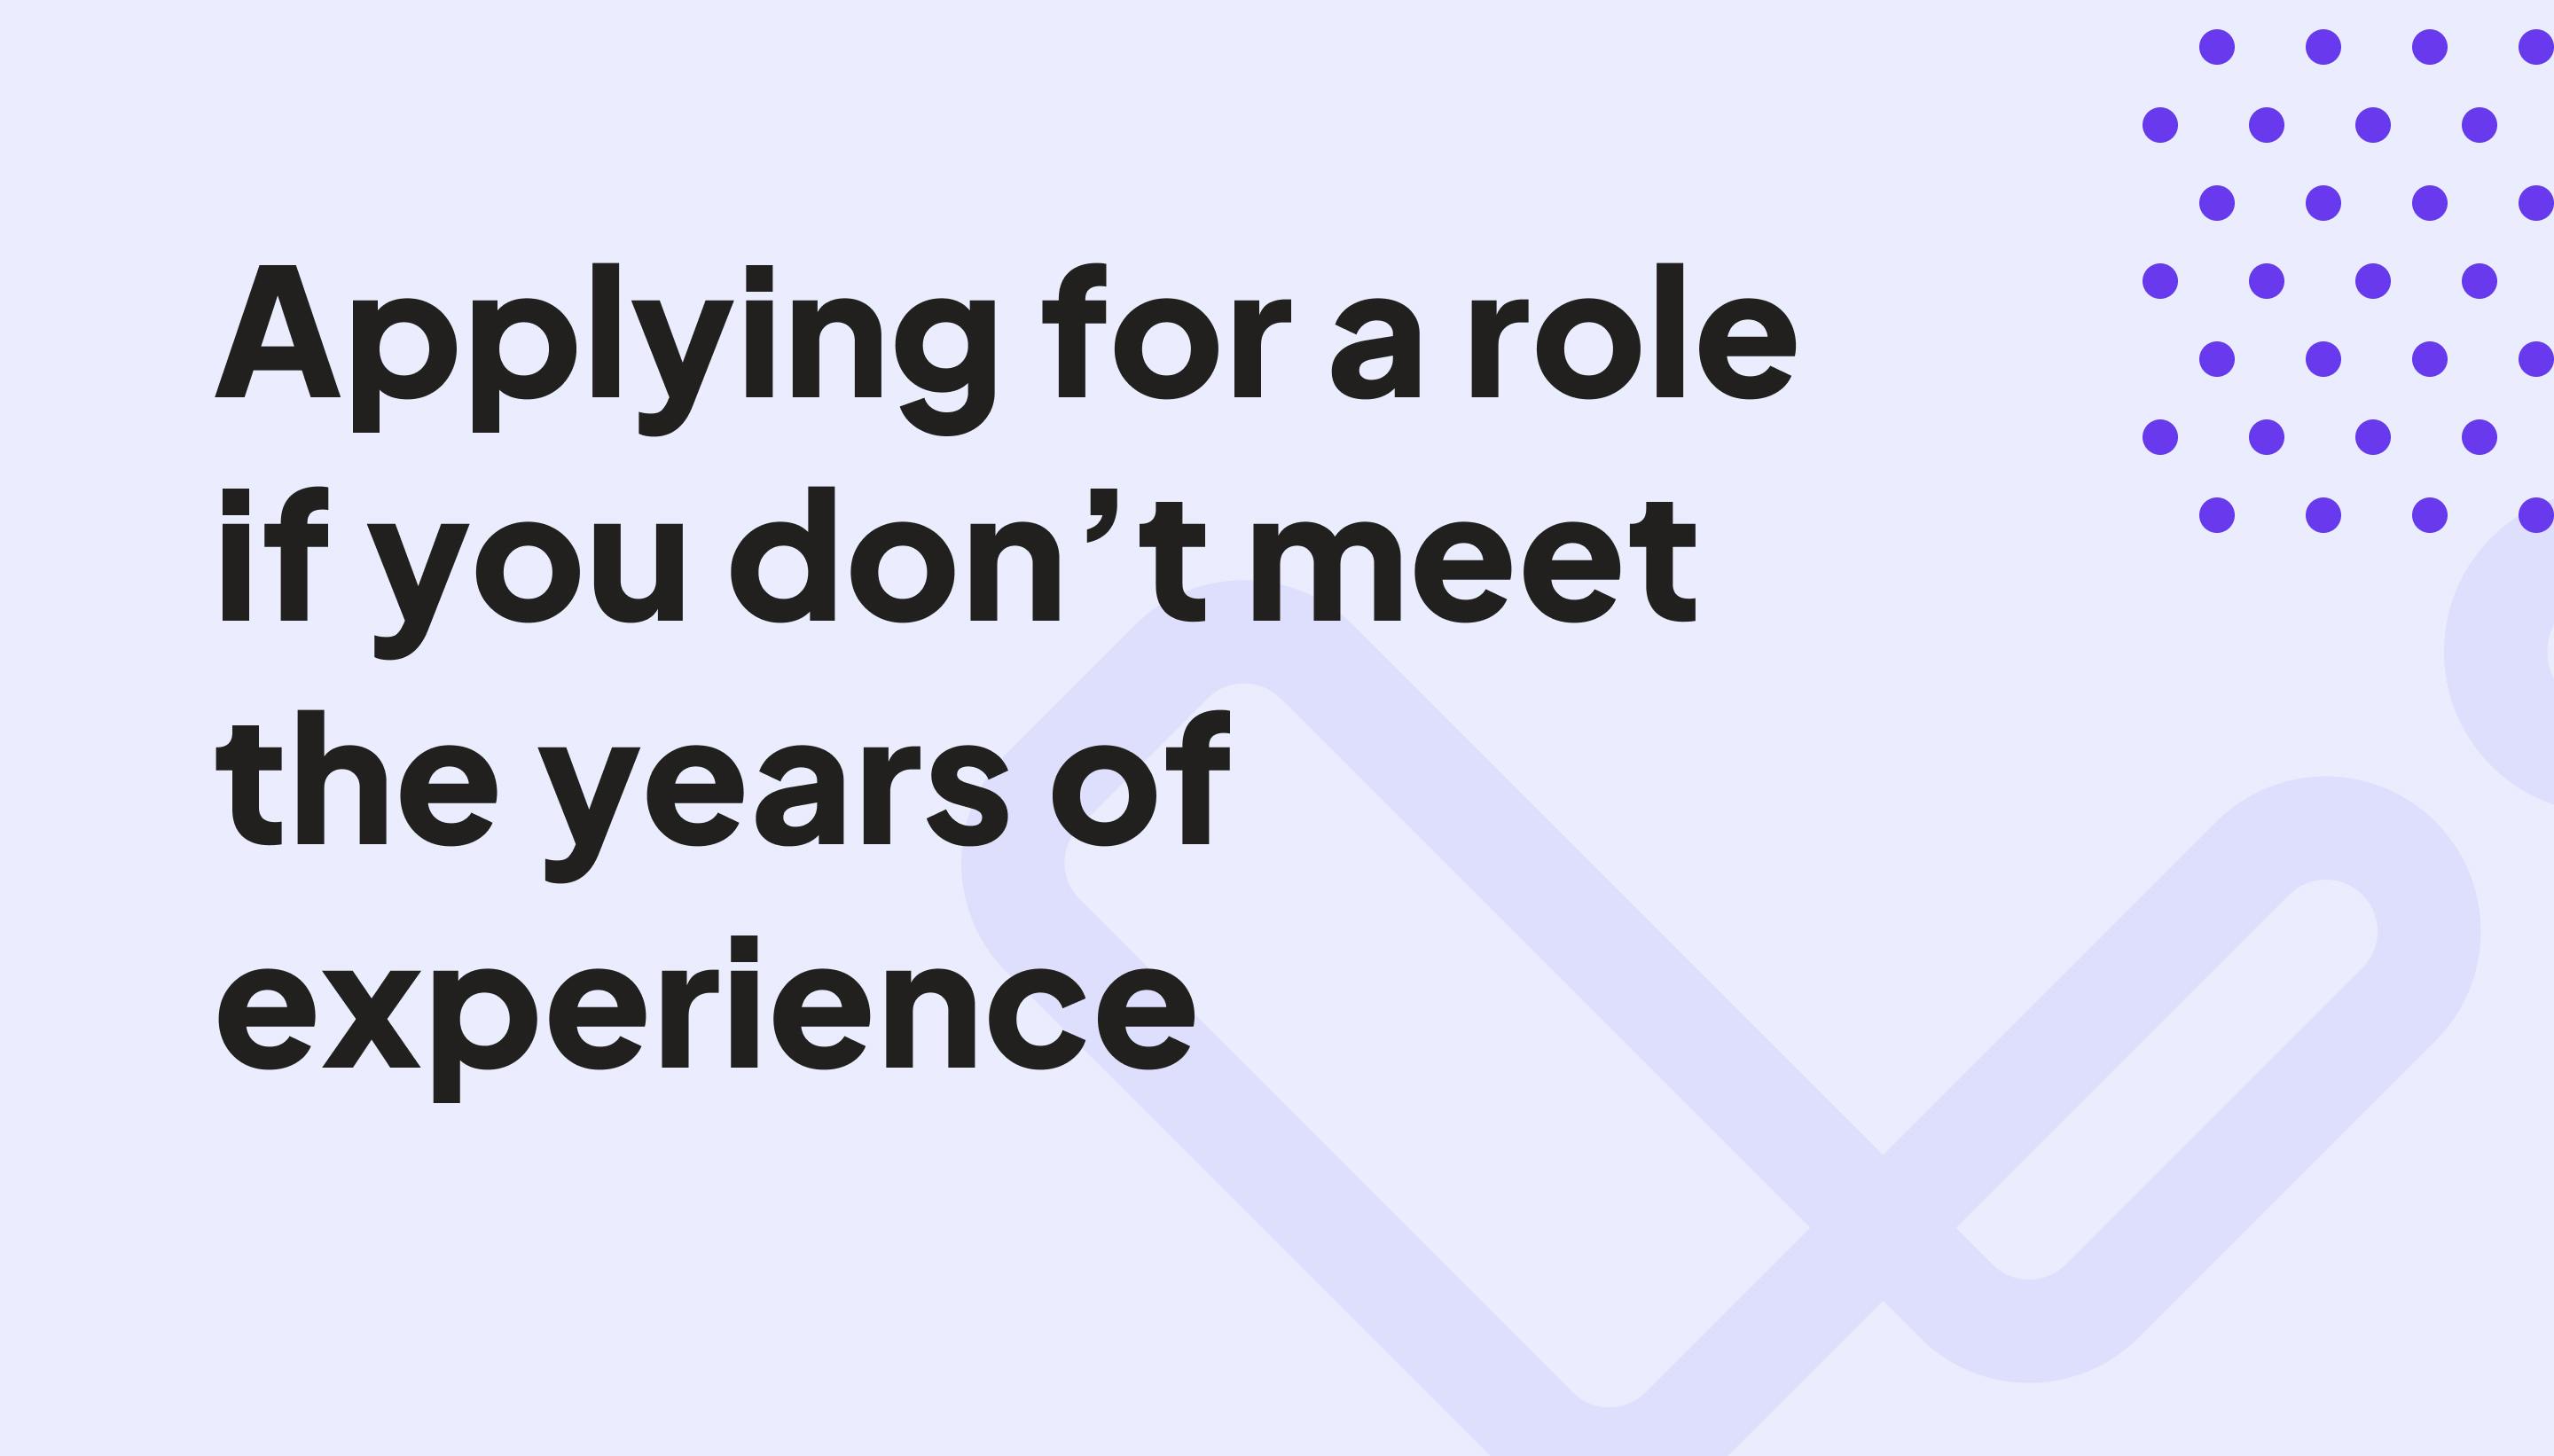 Why you should apply for a role even if you don’t meet the years of experience